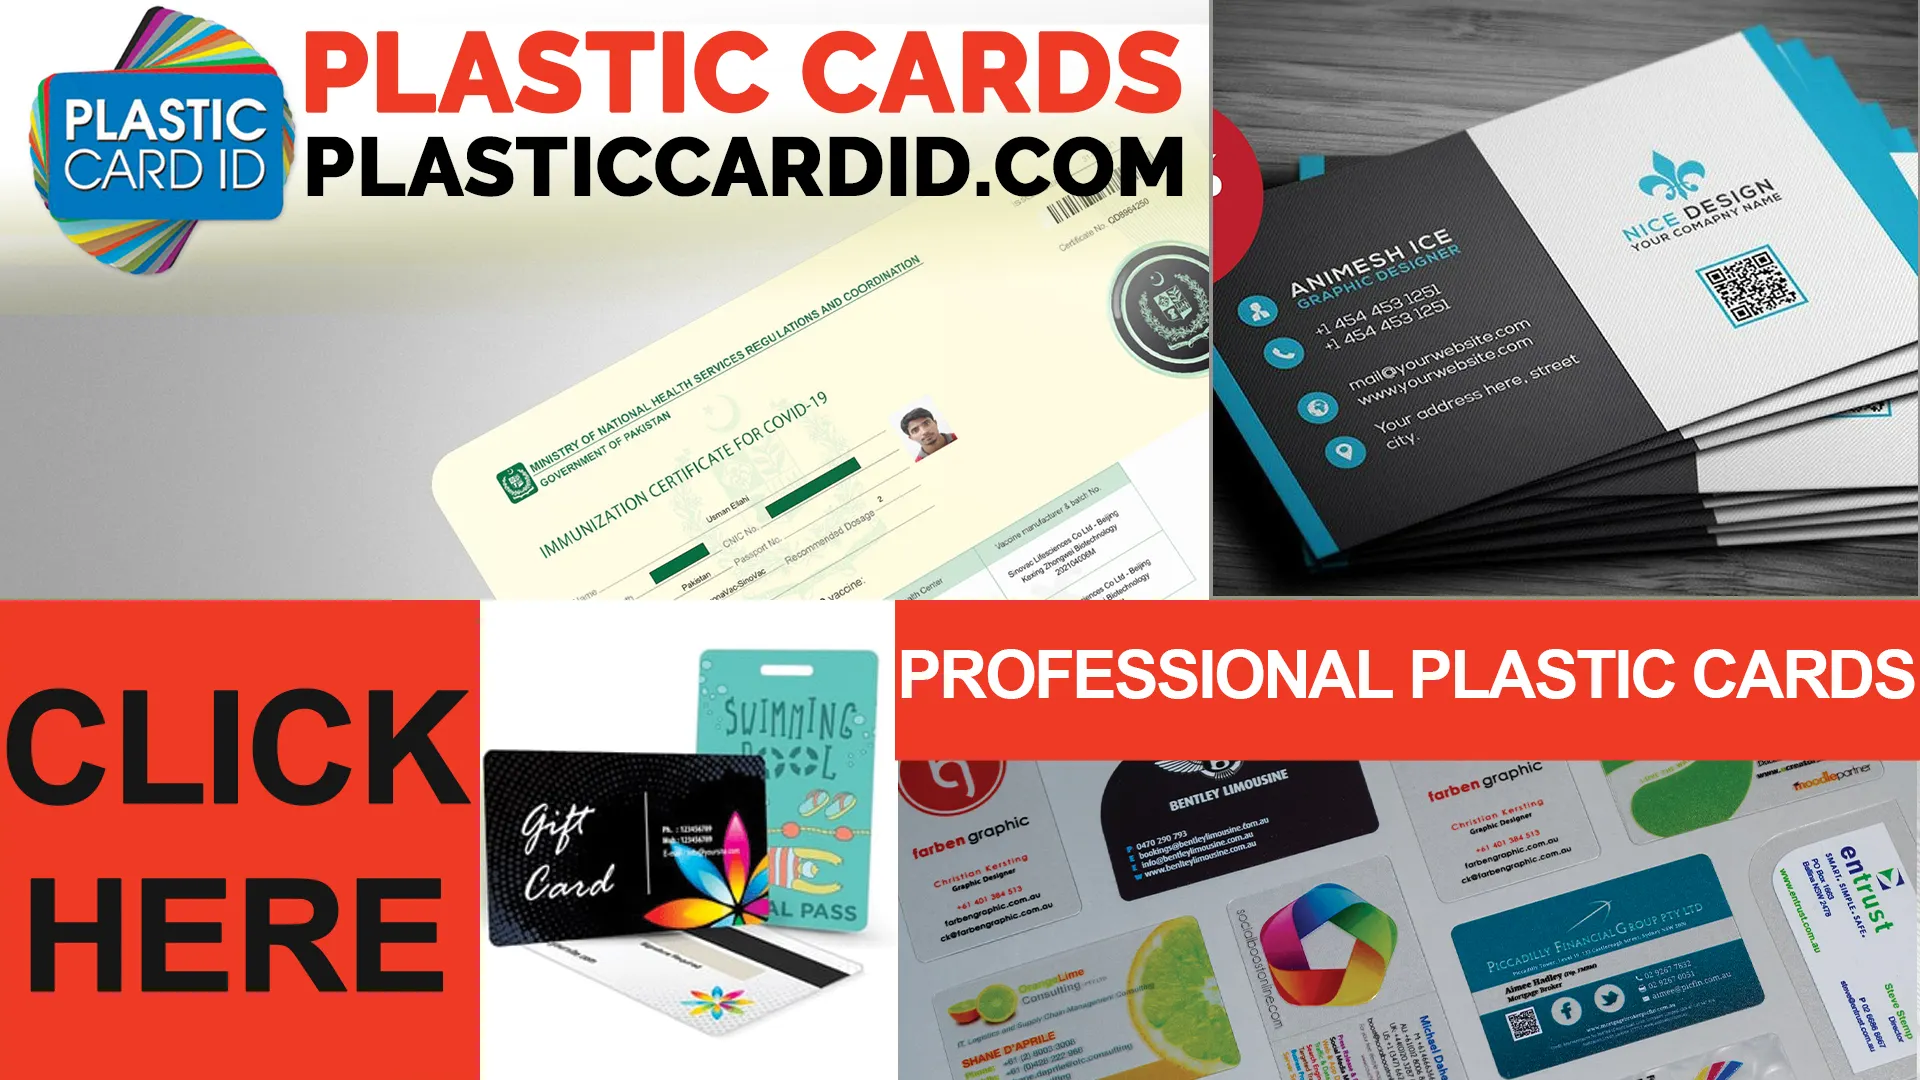 Complementing Our Cards With Eco-Friendly Printers